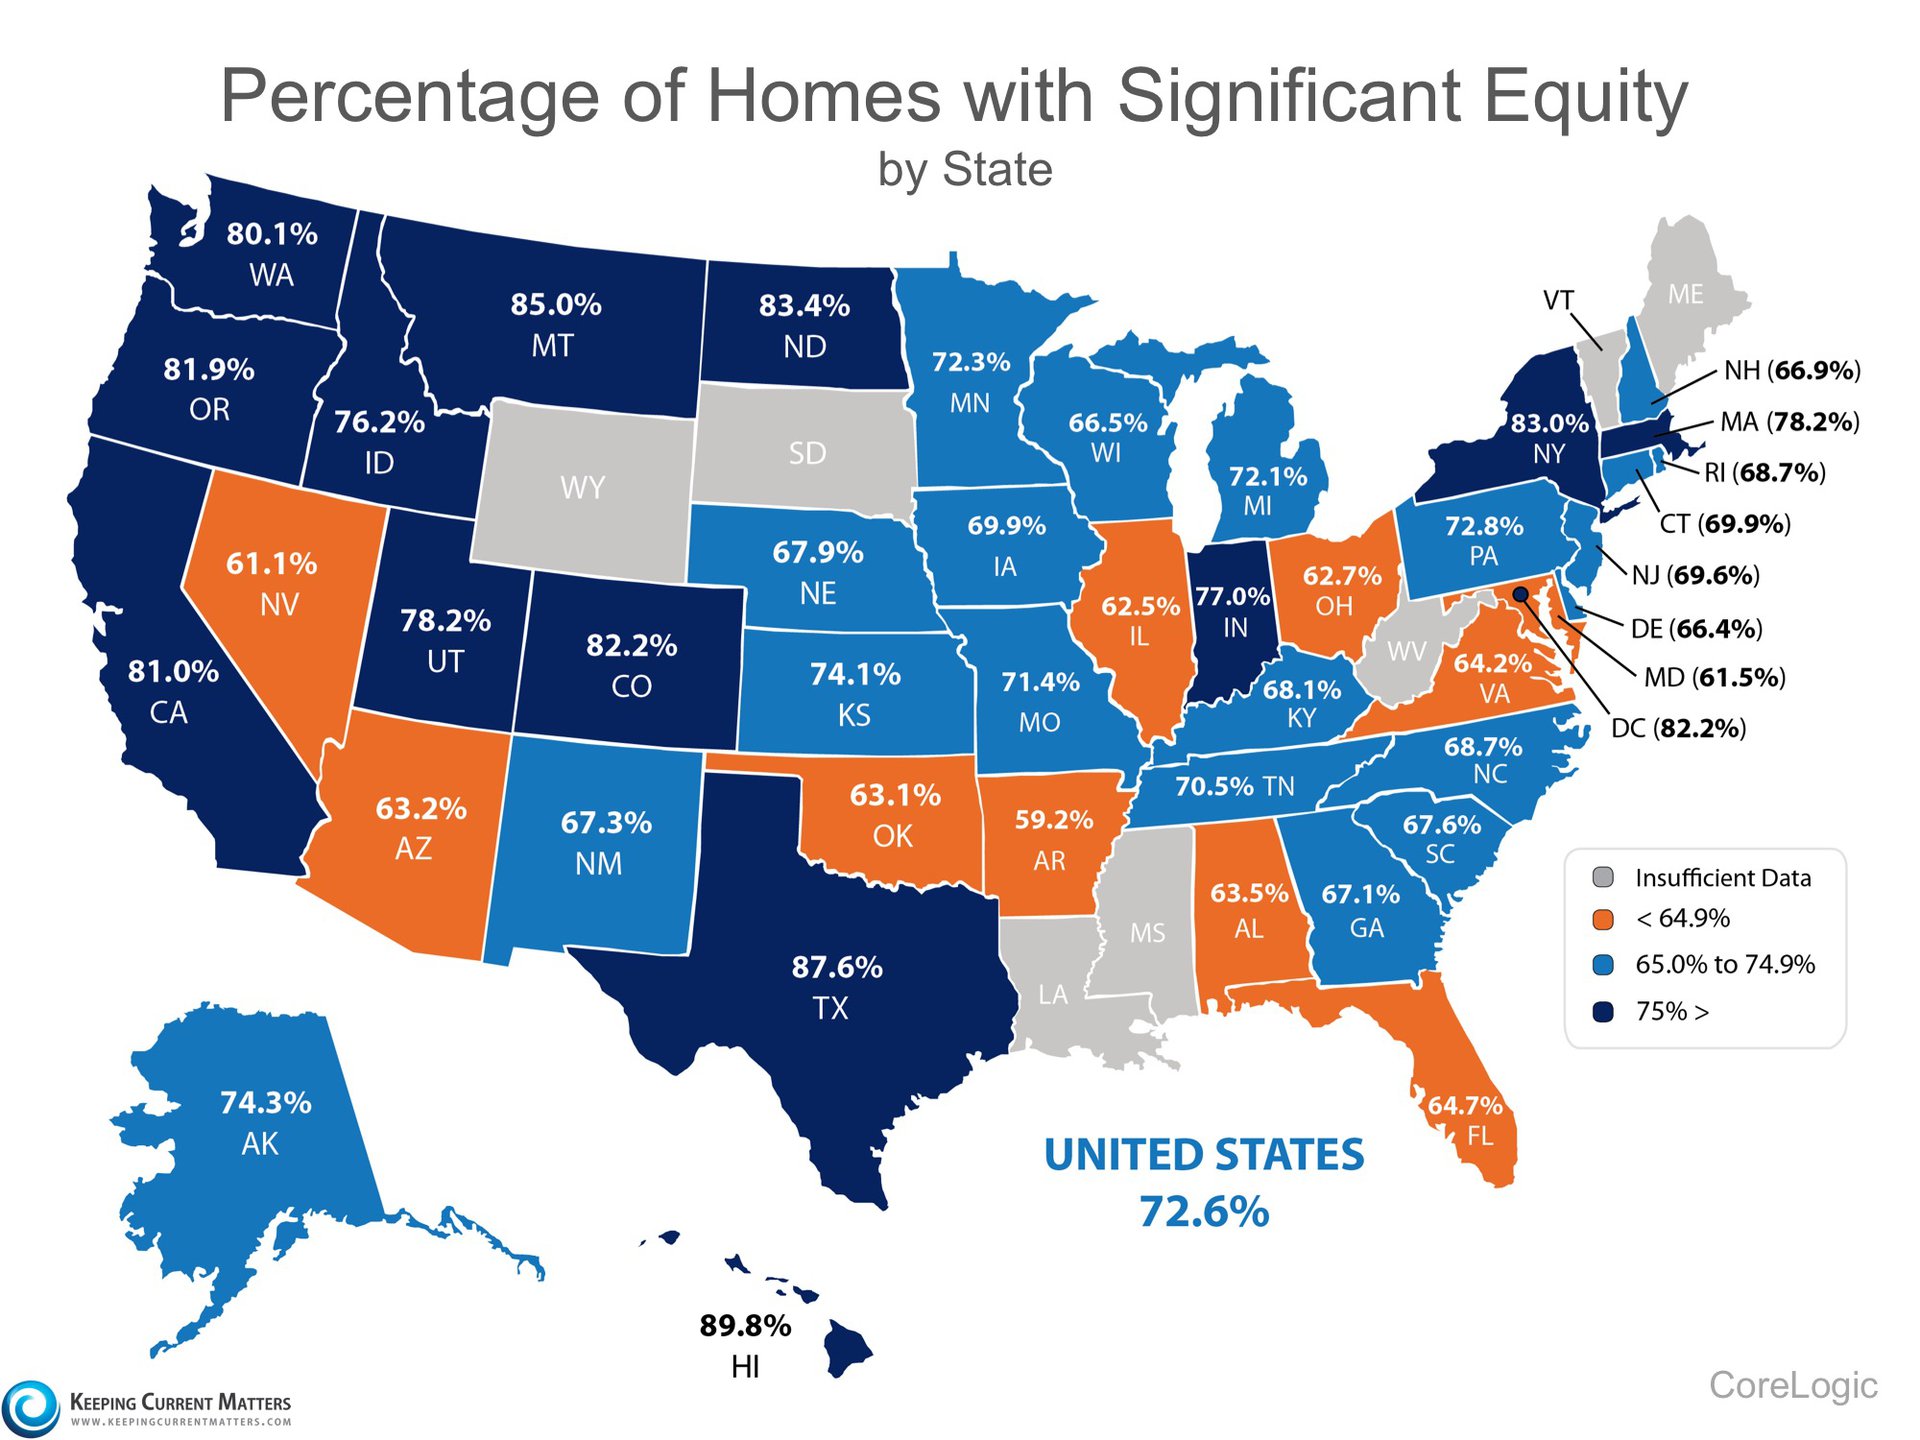 91.5% of Homes in the US have Positive Equity | Keeping Current Matters